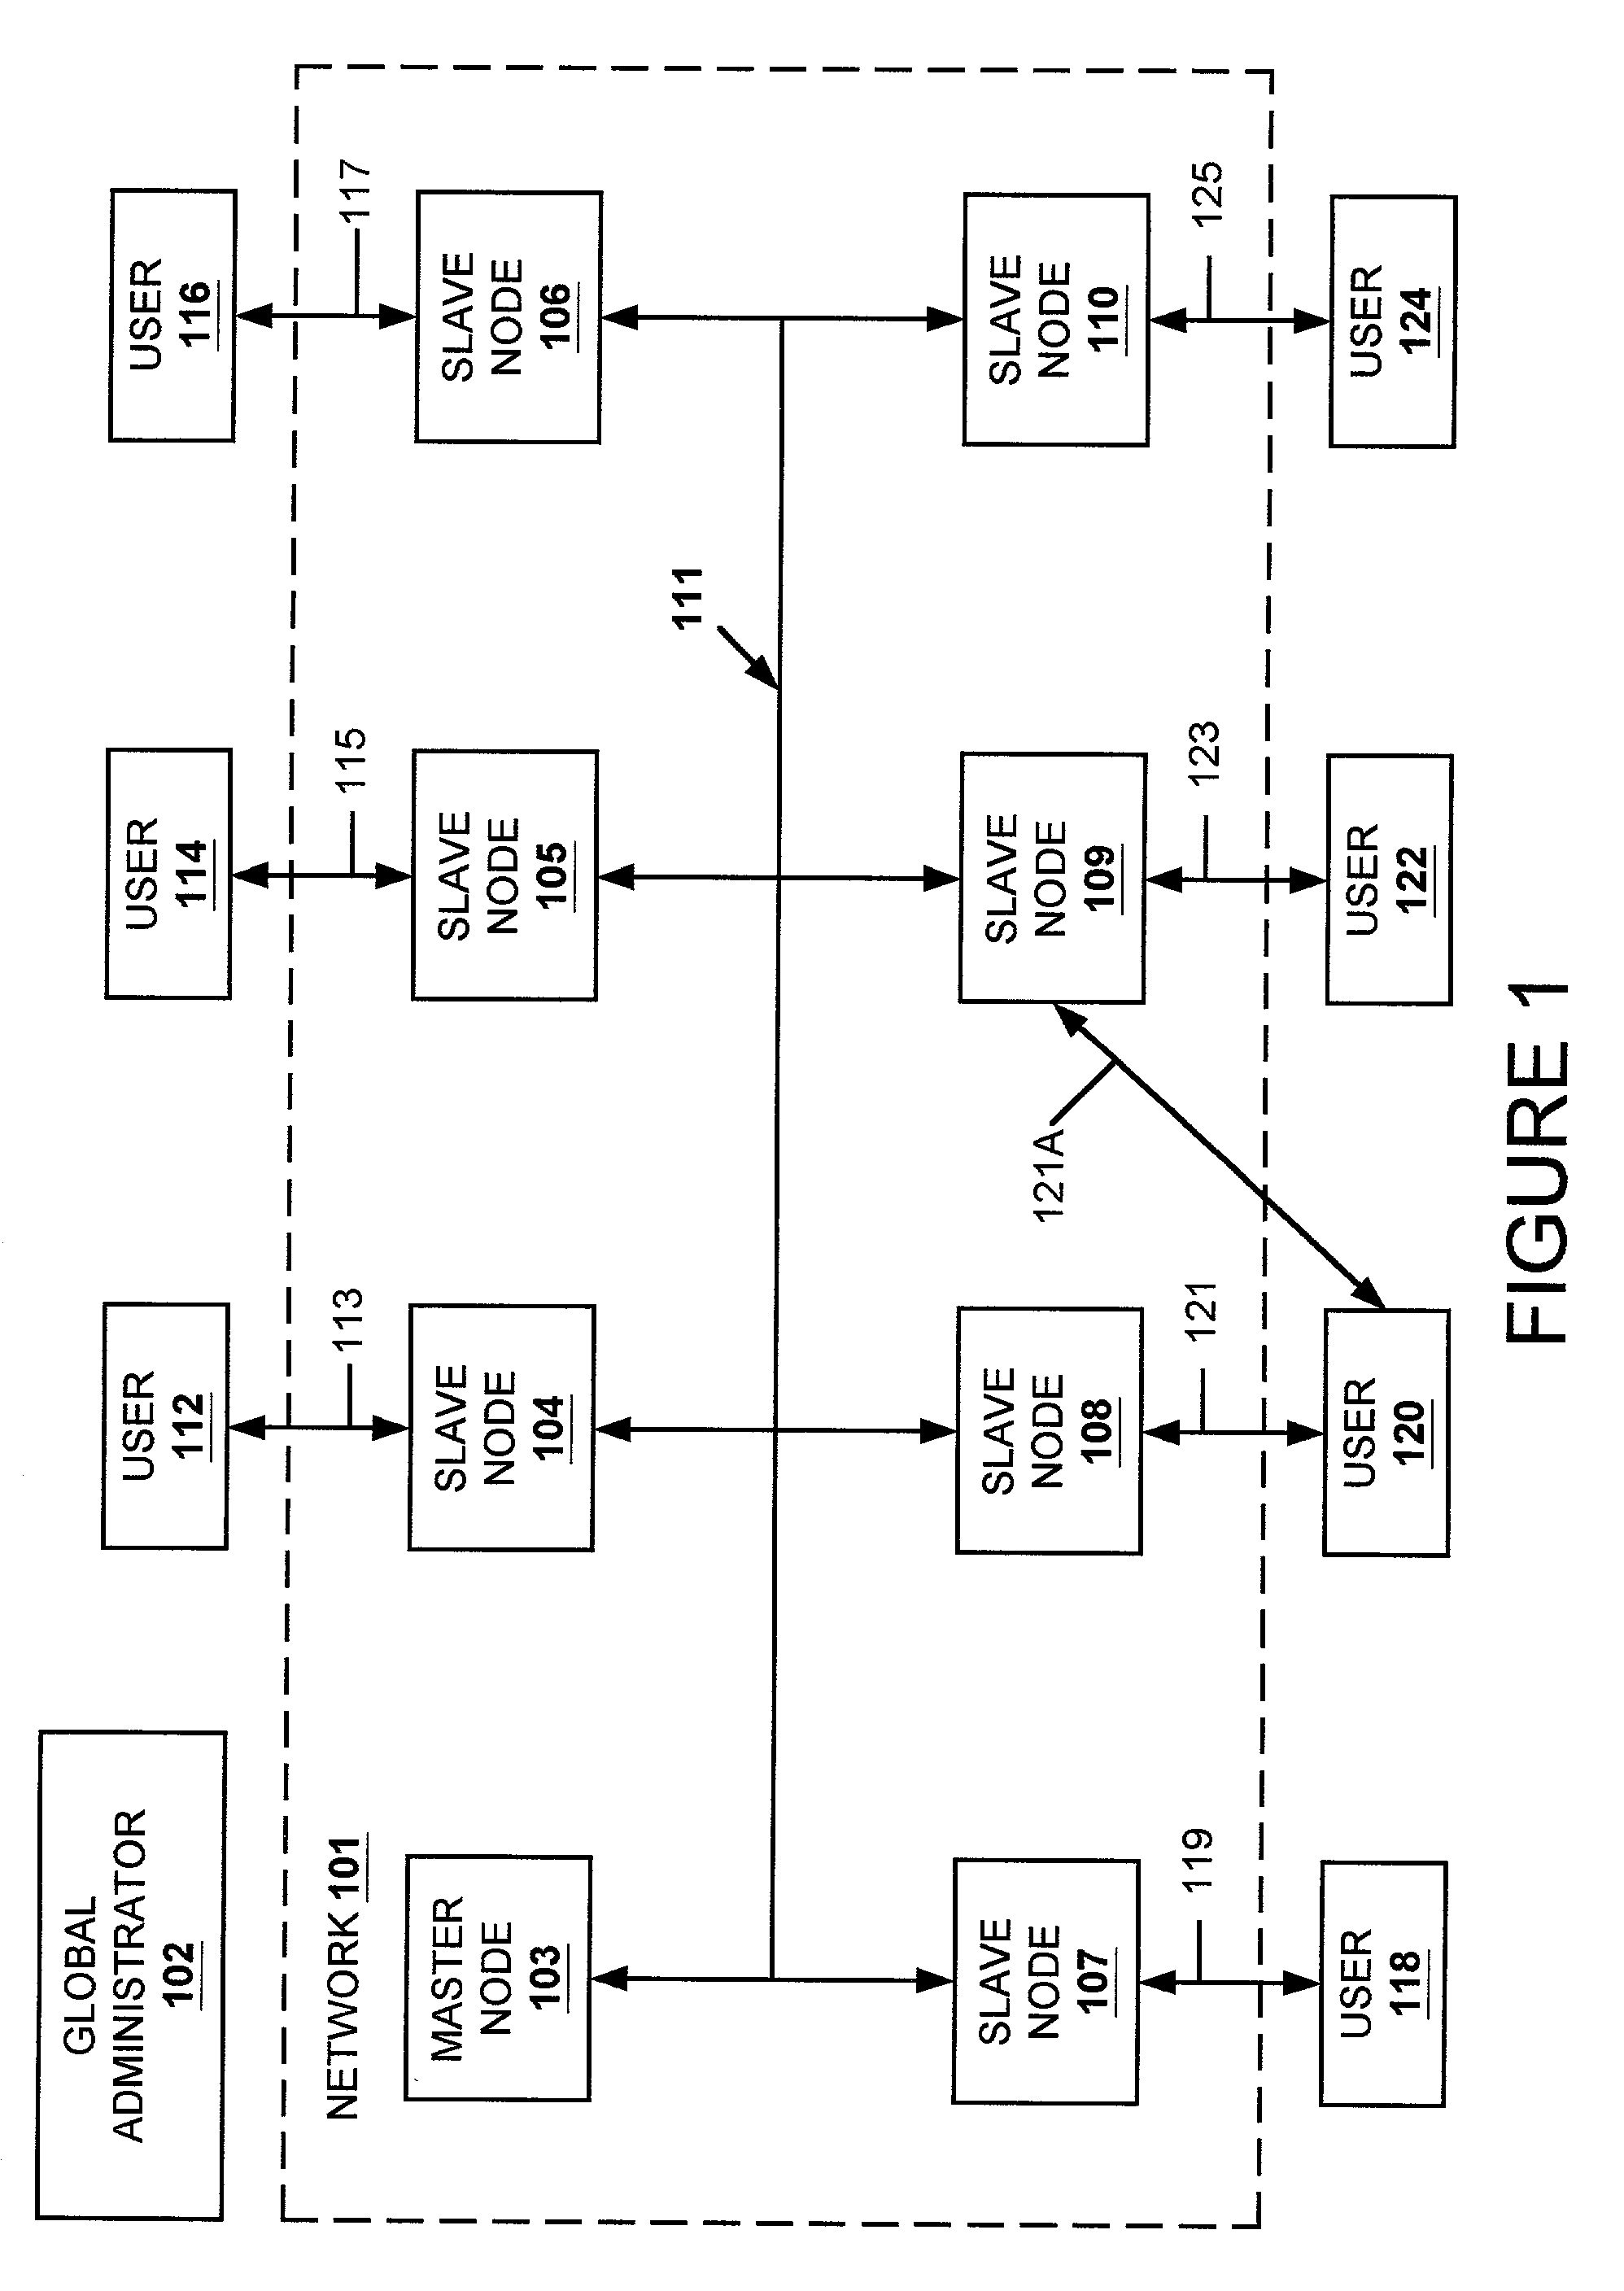 Data replication facility for distributed computing environments